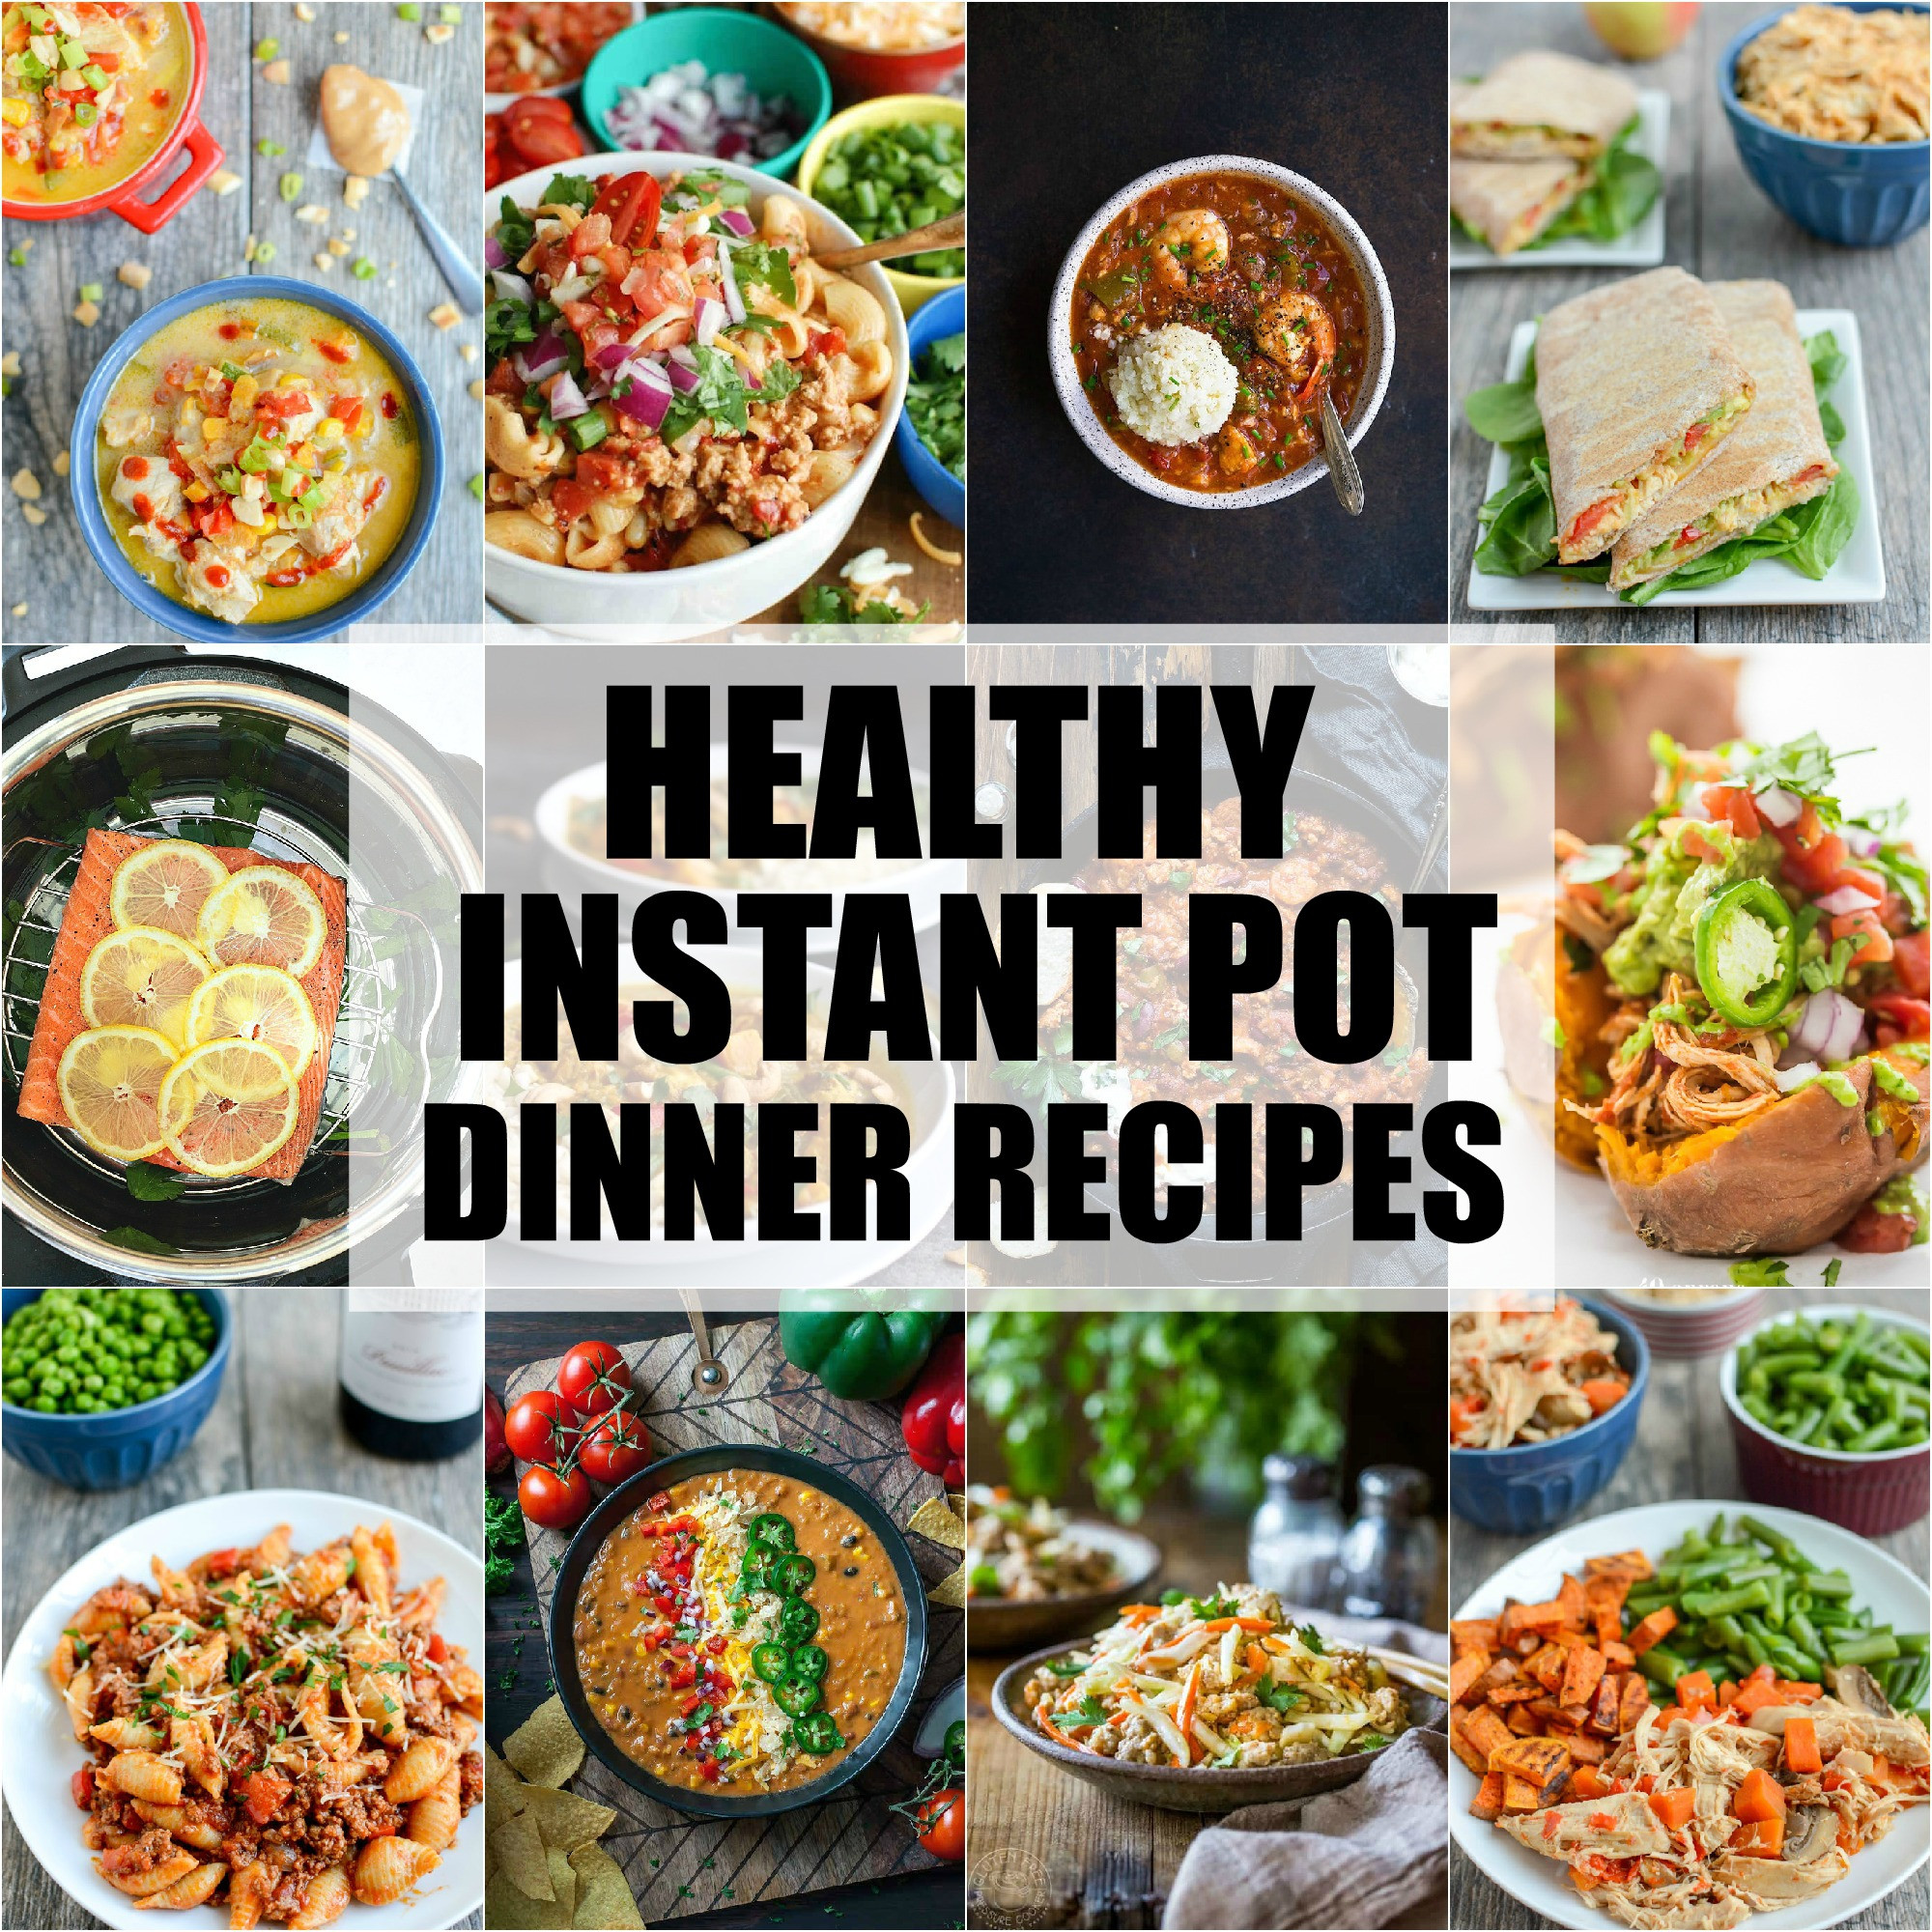 Instant Pot Dinner Recipes Healthy the top 20 Ideas About Healthy Instant Pot Dinner Recipes